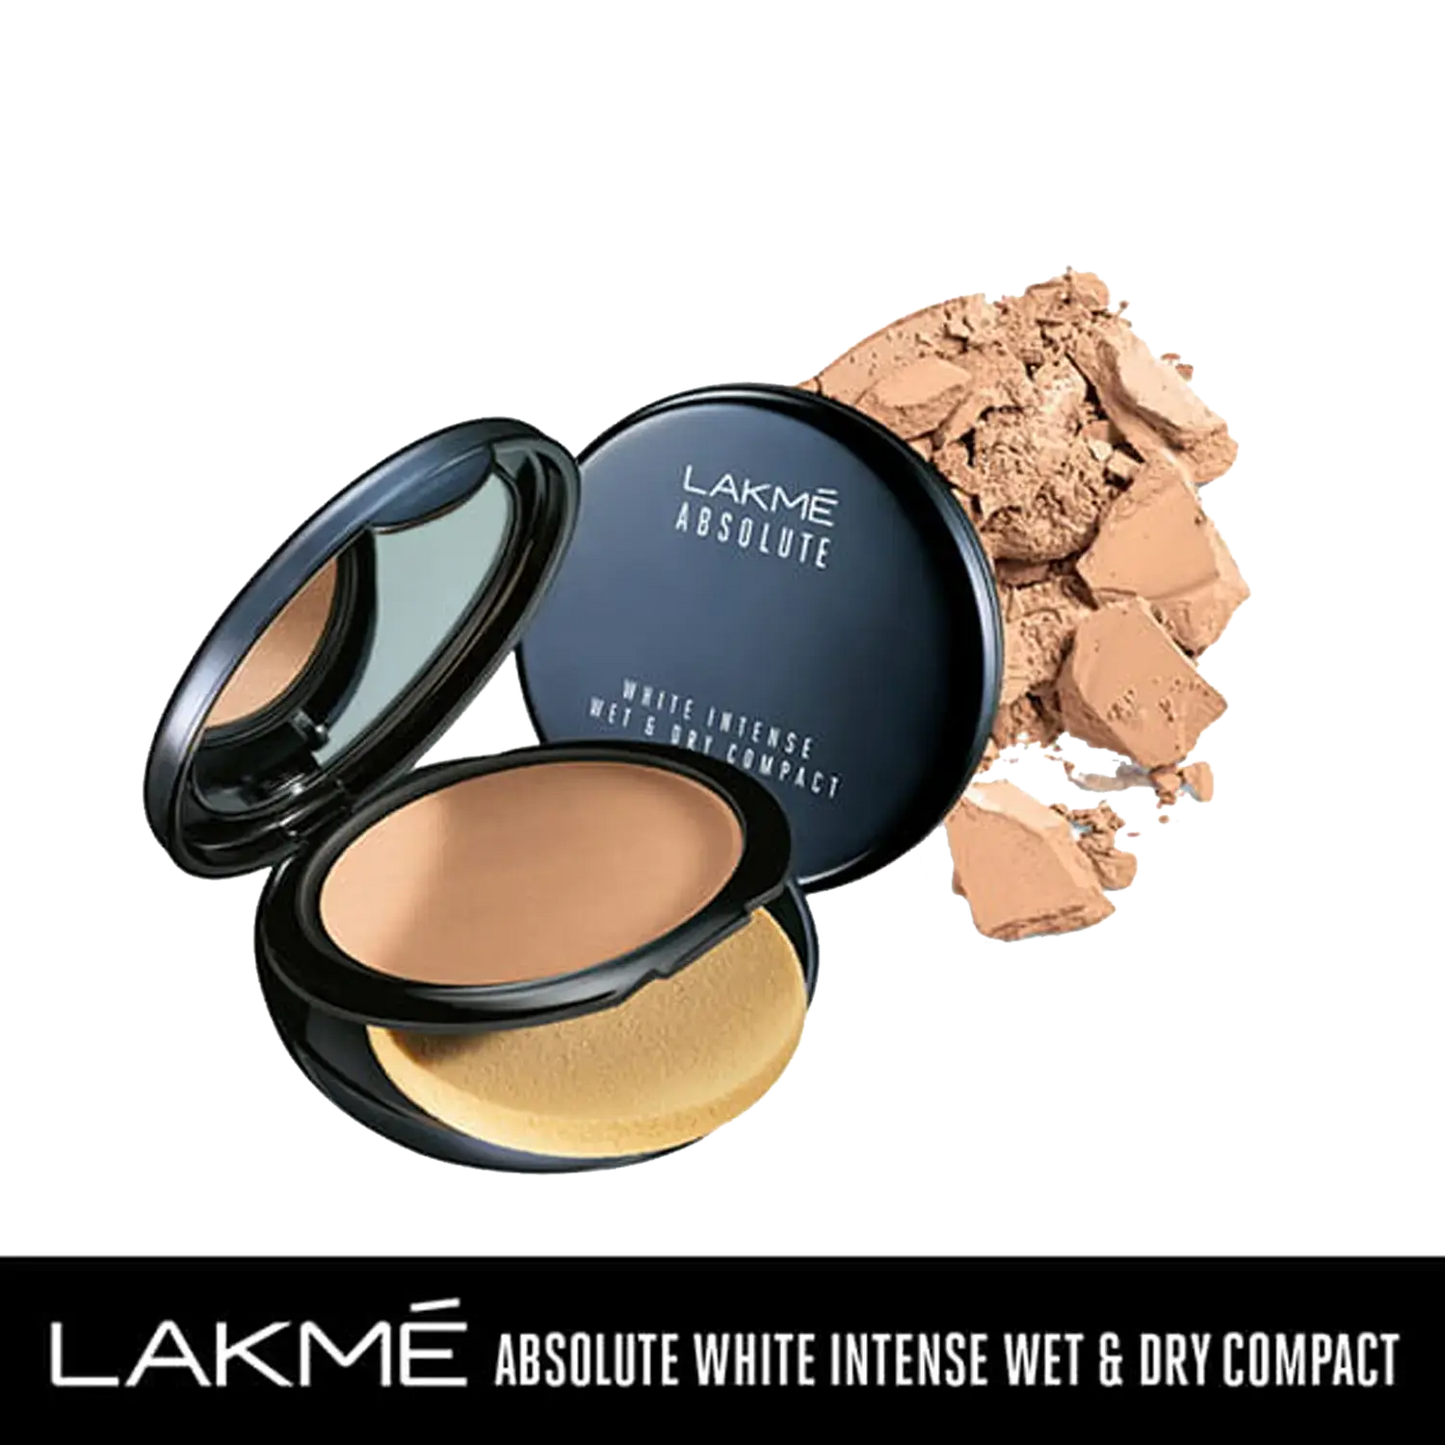 Lakme Absolute Wet & Dry Compact - Almond Honey 06 (9g)